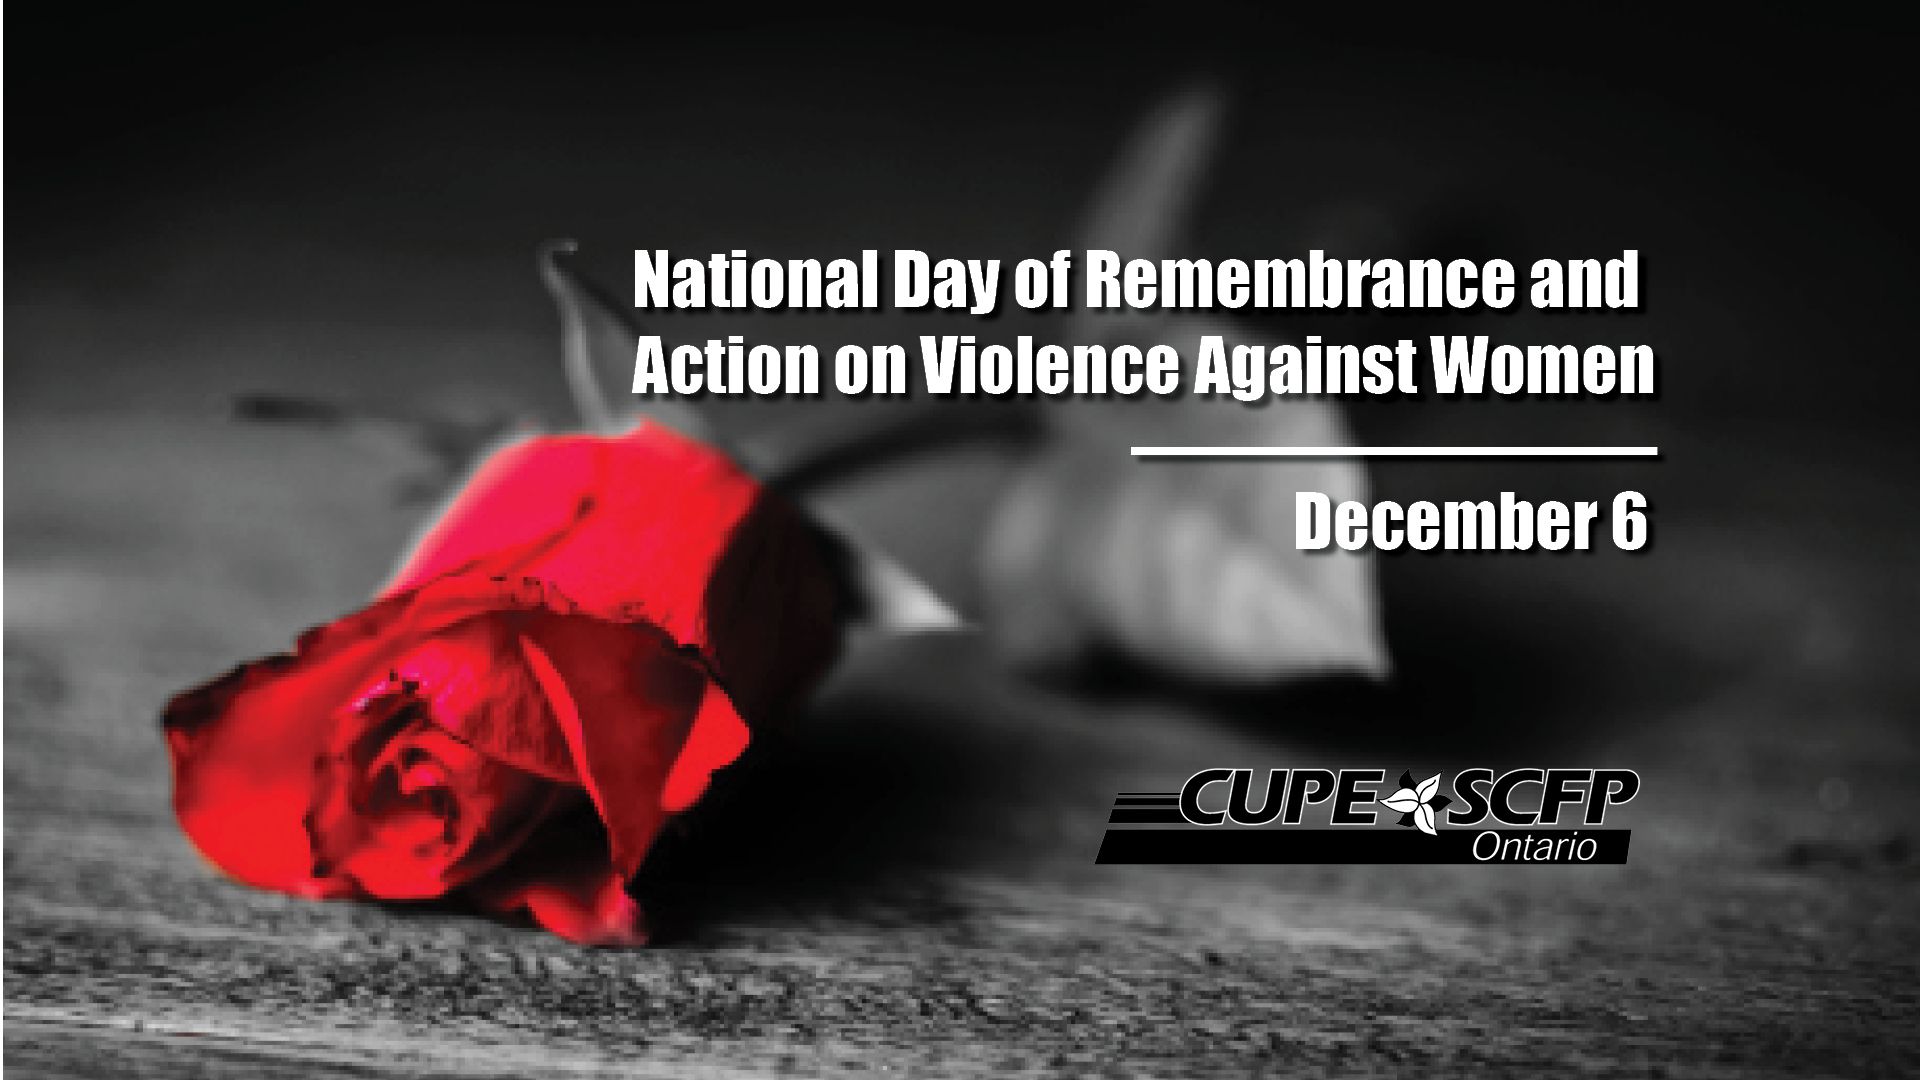 Statement on National Day of Remembrance and Action on Violence